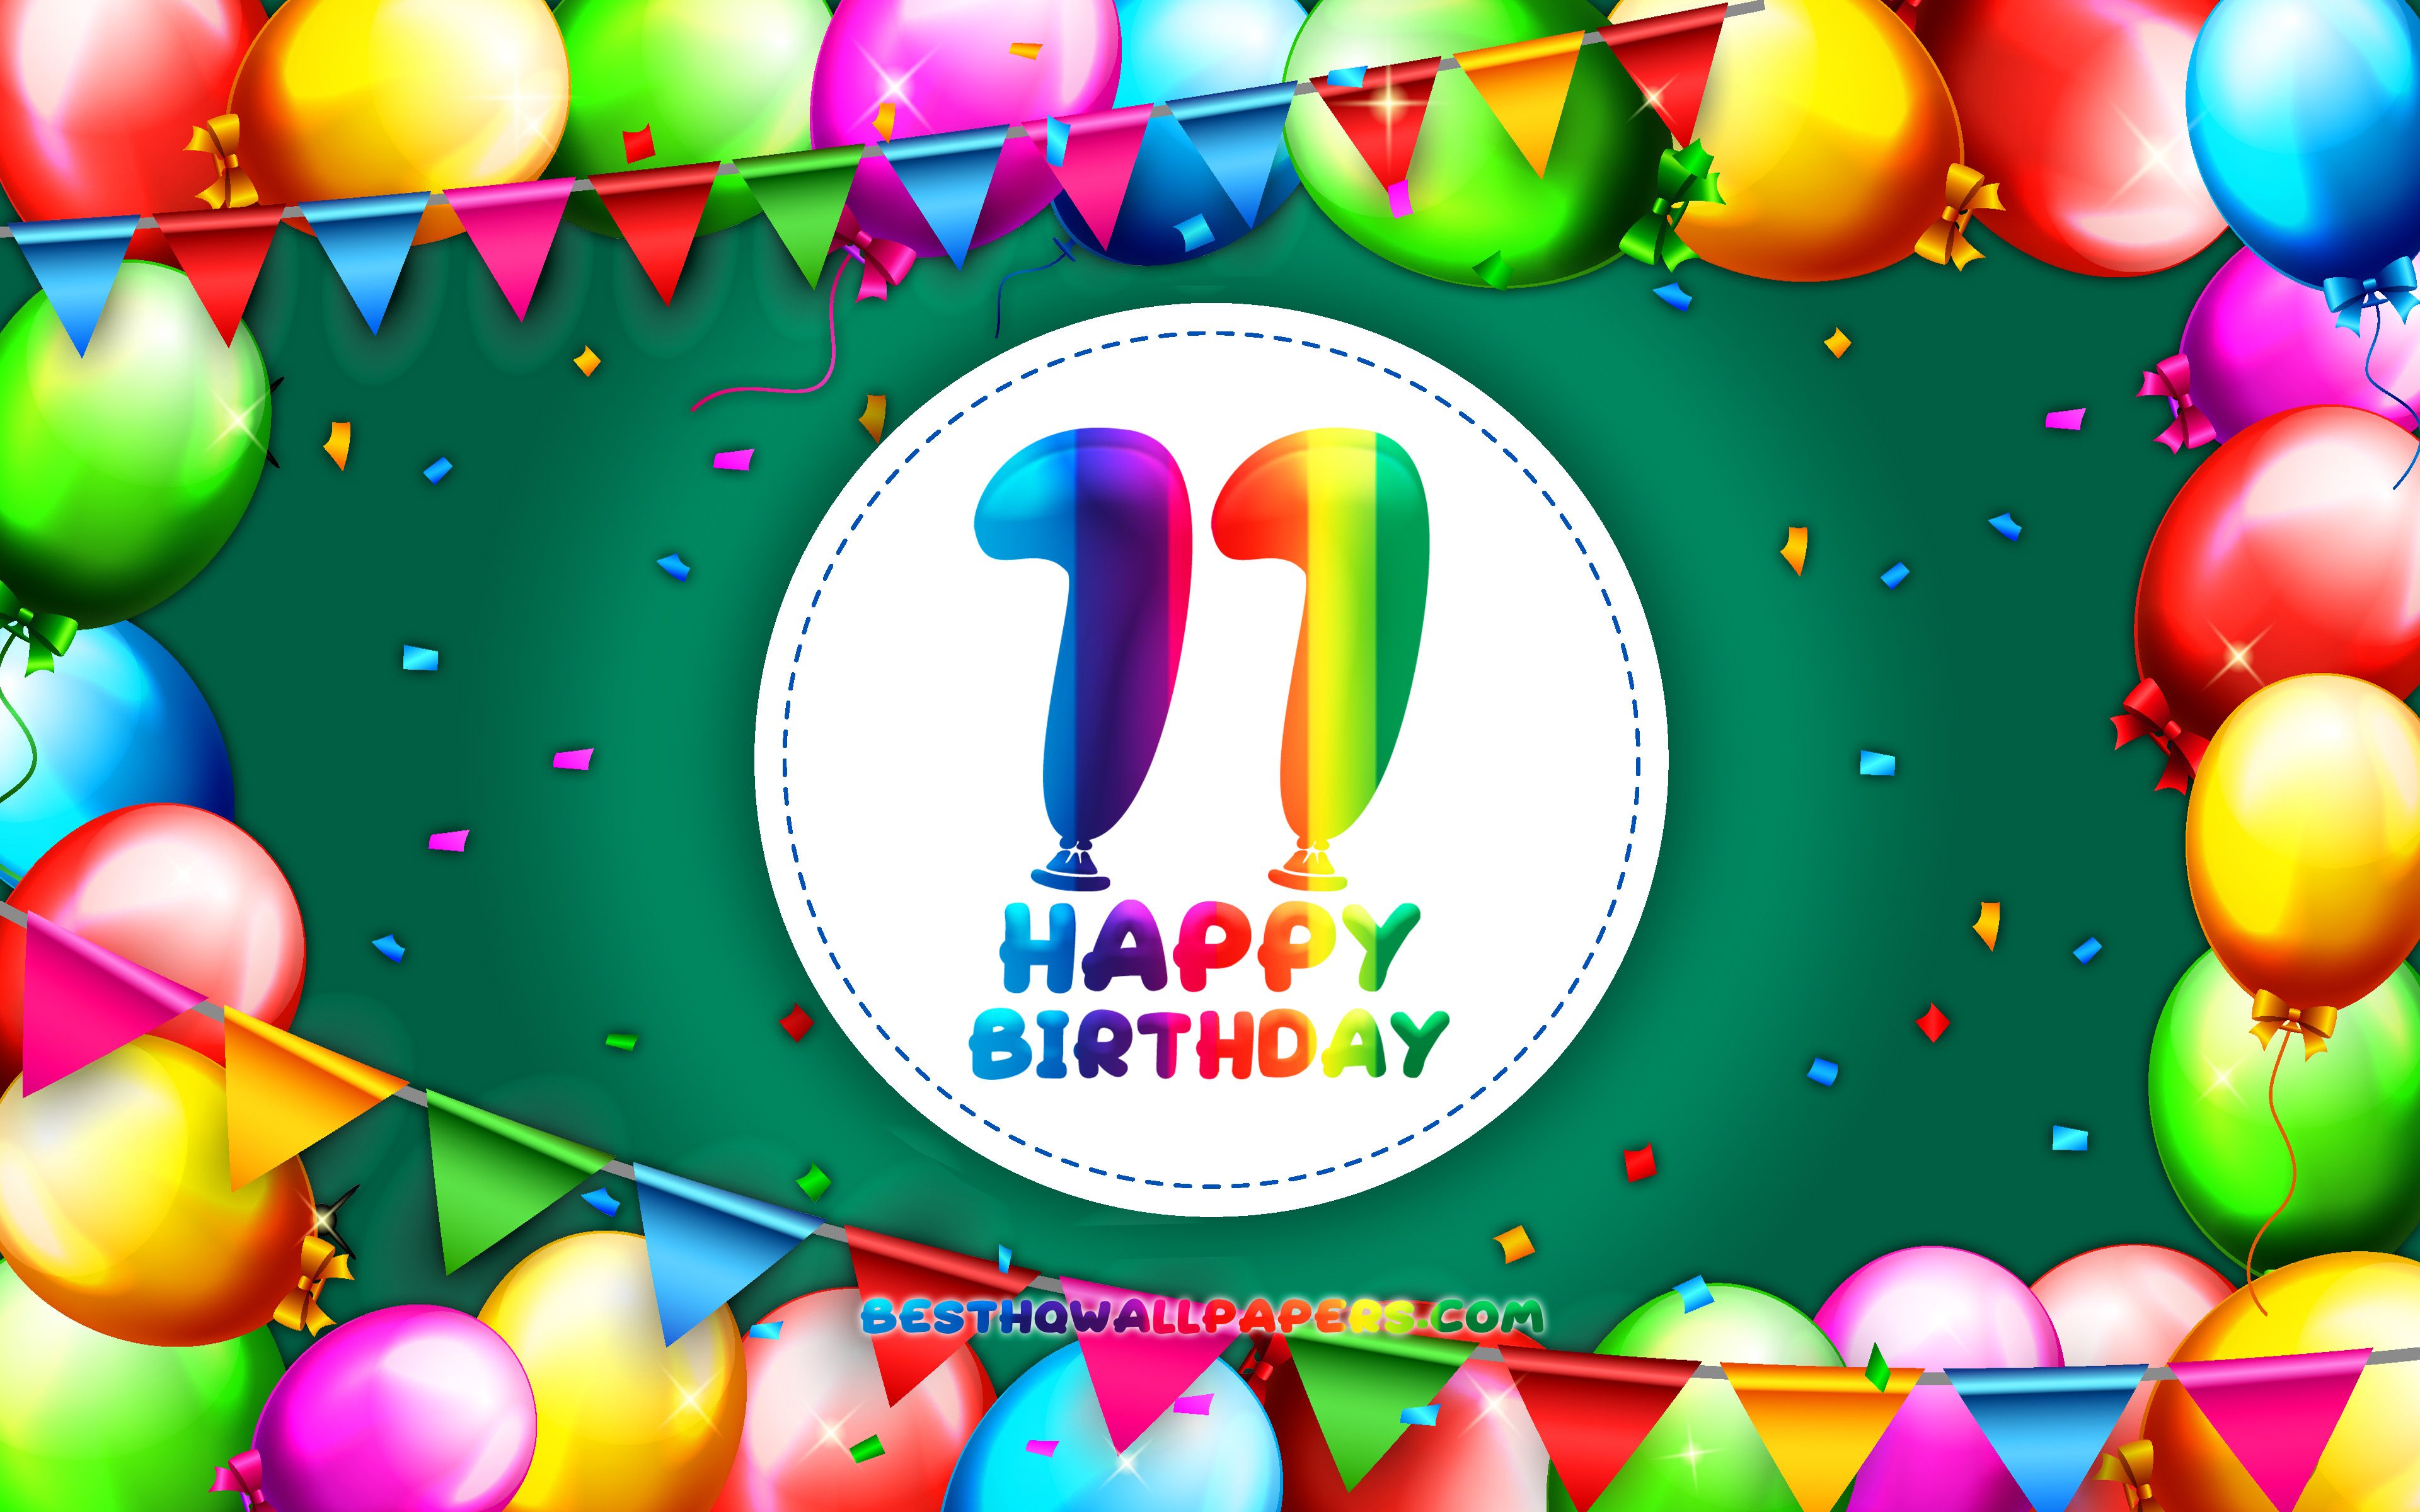 Download wallpaper Happy 11th birthday, 4k, colorful balloon frame, Birthday Party, purple background, Happy 11 Years Birthday, creative, 11th Birthday, Birthday concept, 11th Birthday Party for desktop with resolution 3840x2400. High Quality